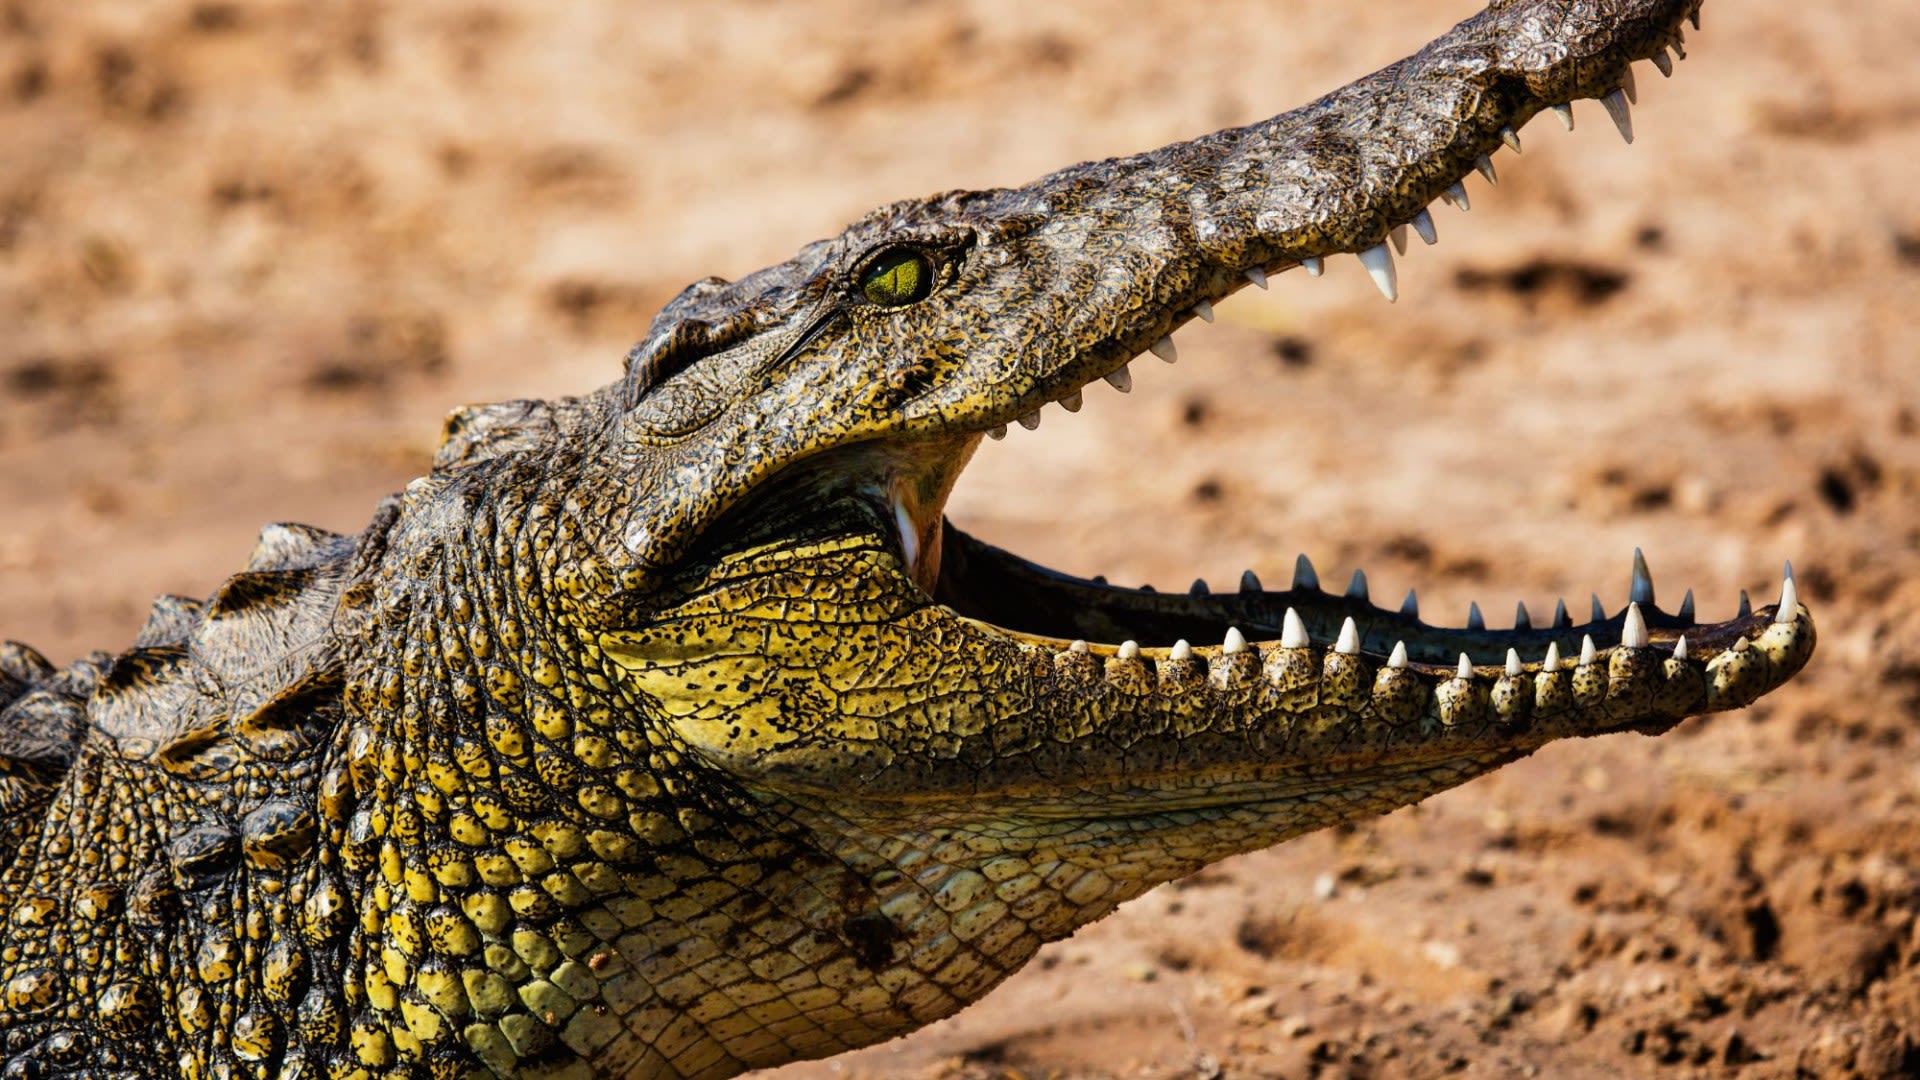 Disabled boy mauled to death by crocodiles after being thrown into river by mum